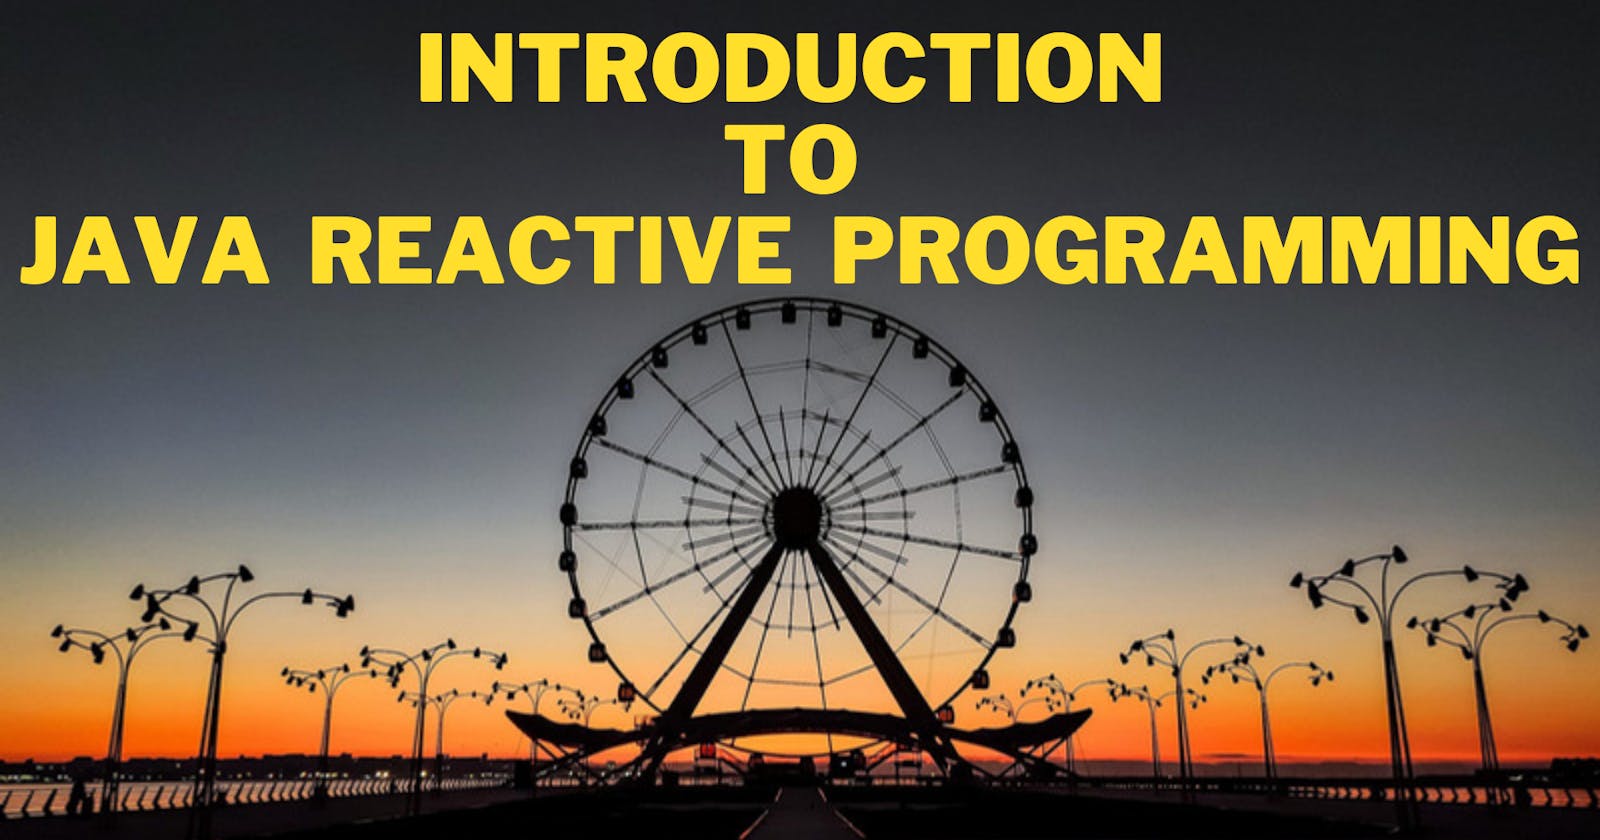 Introduction to Java Reactive Programming